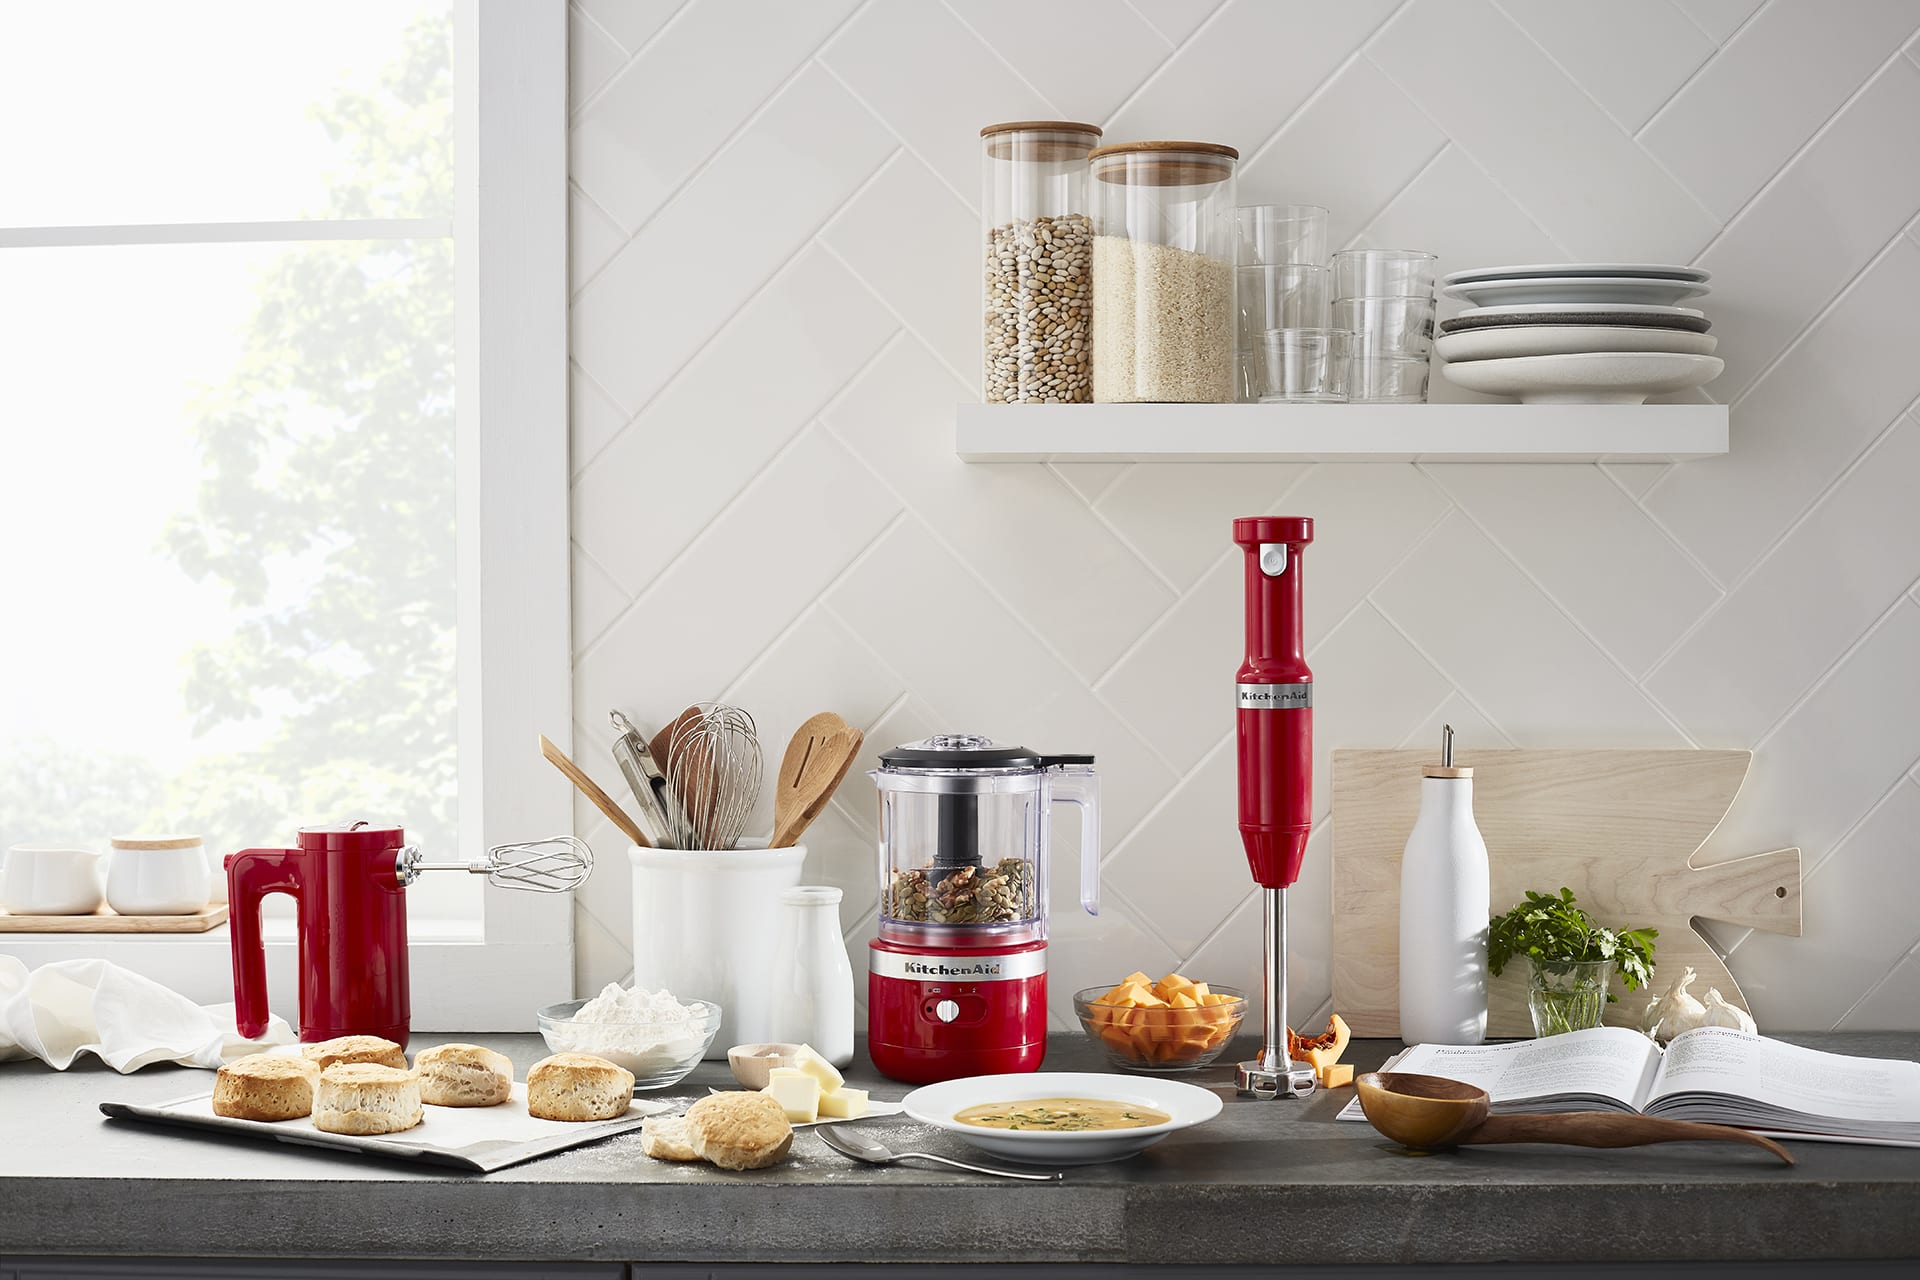 4 Reasons Why The Multi-Tasking Cook Will Love KitchenAid’s Cordless Appliances